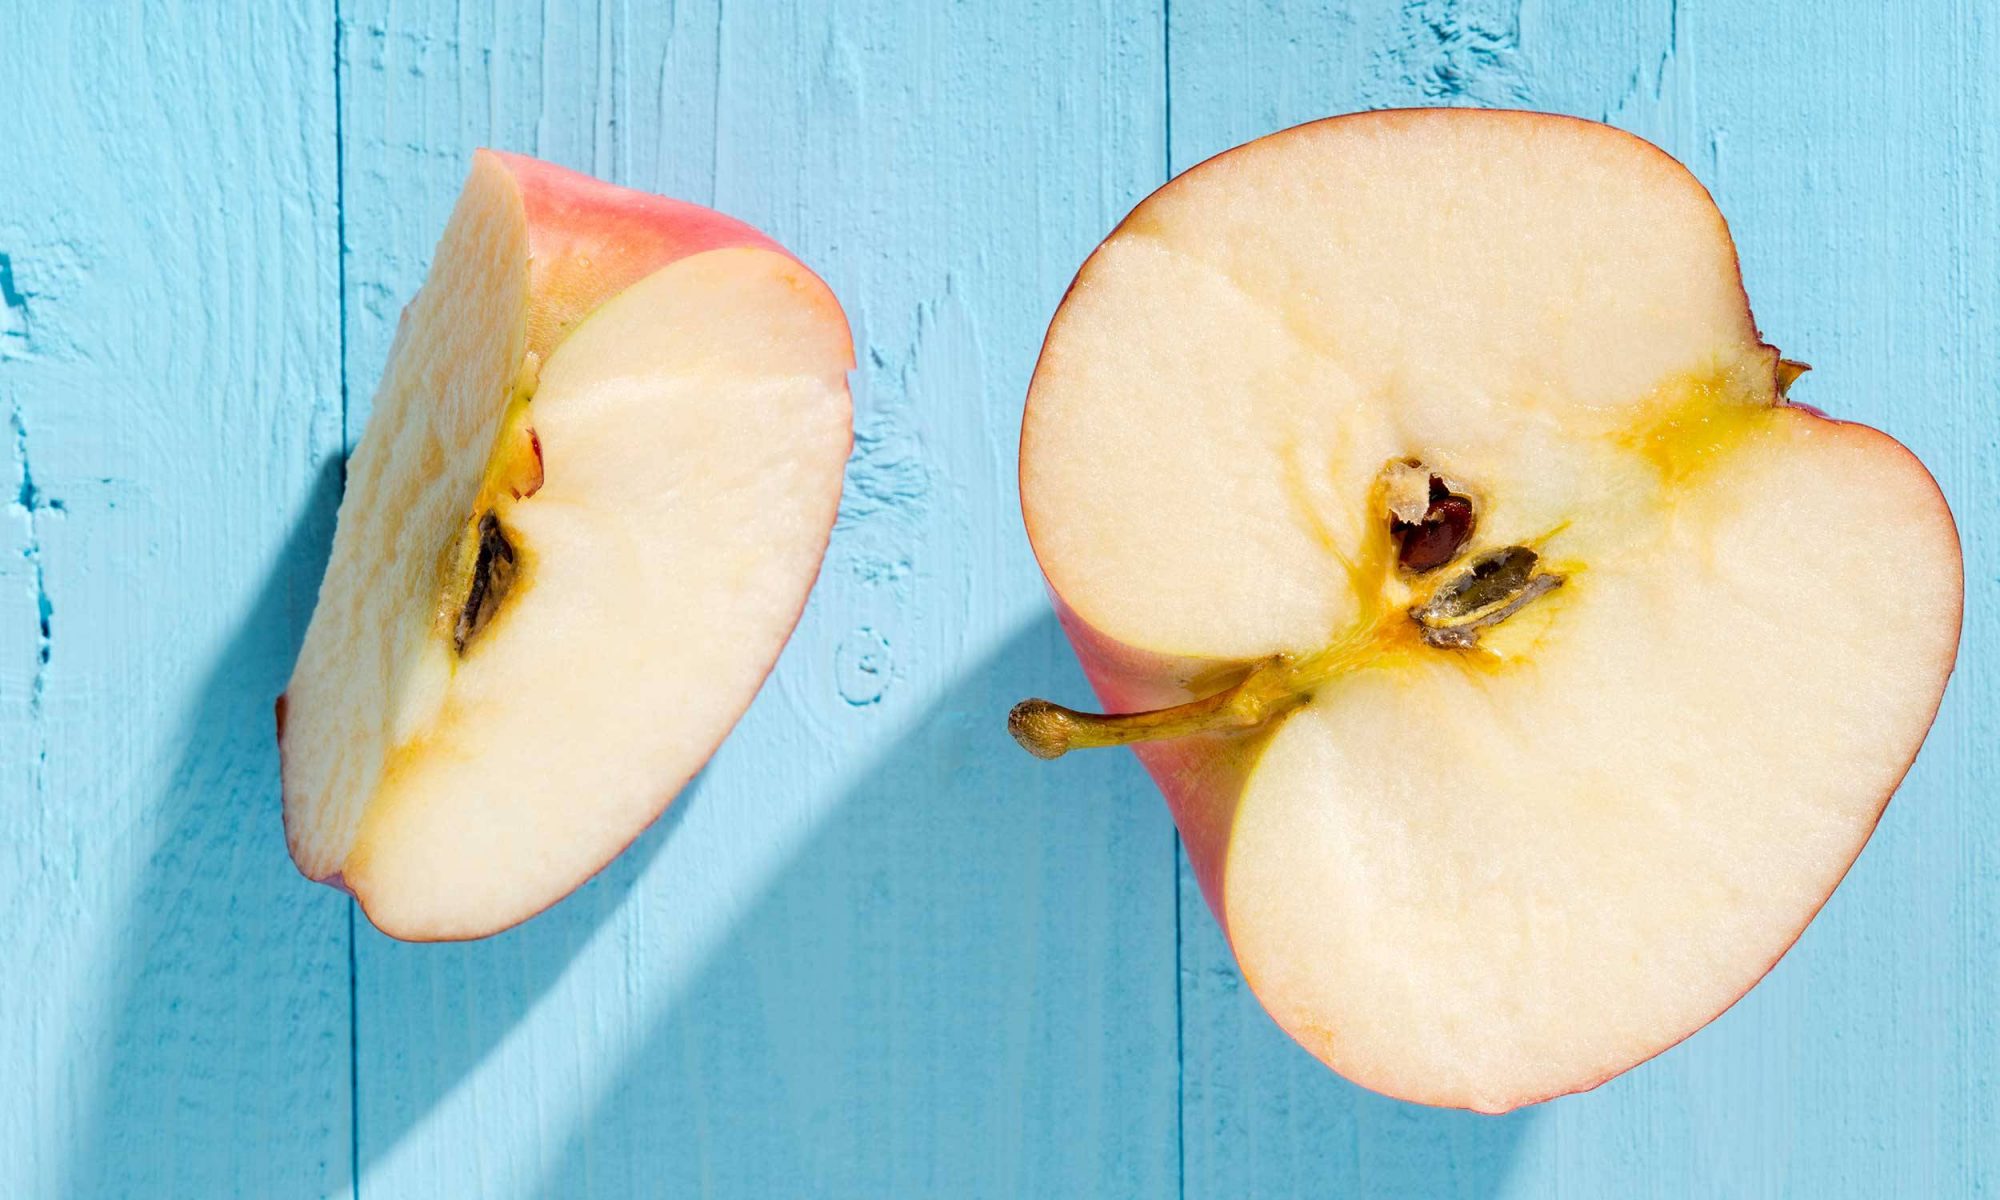 How to Prevent Apples From Browning